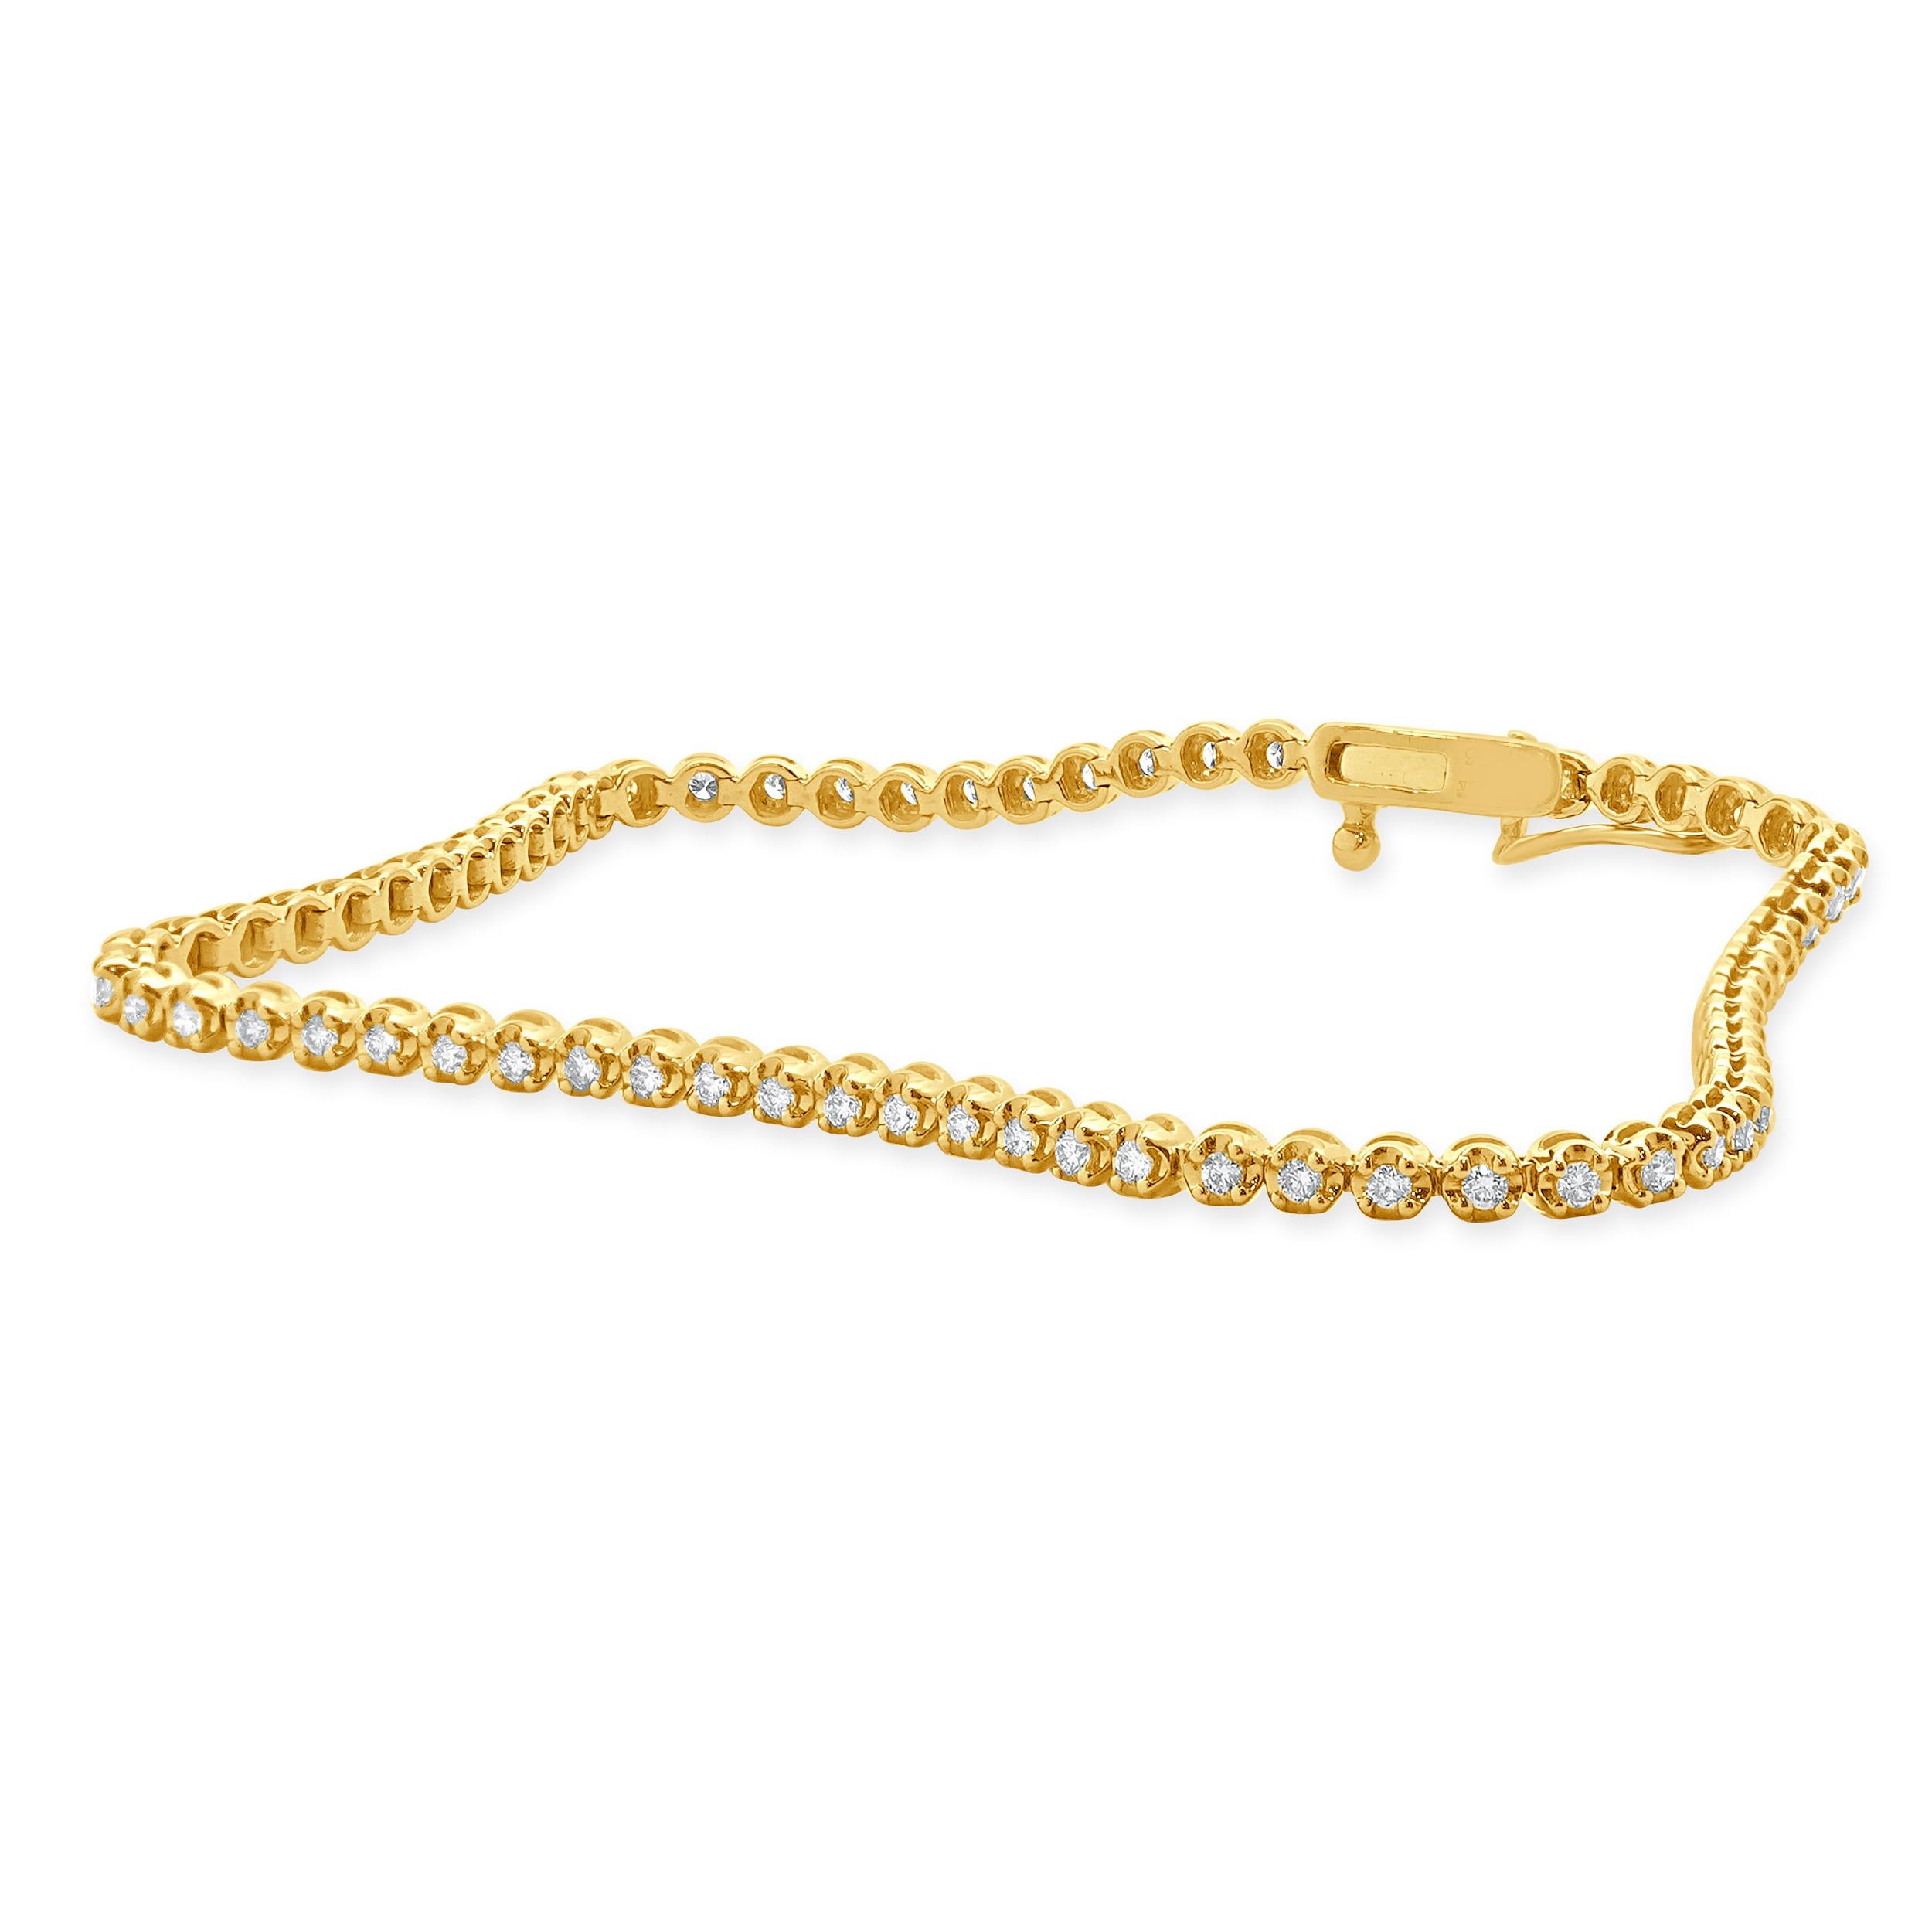 Designer: custom
Material: 14K yellow gold
Diamond: 71 round brilliant cut = 0.76cttw
Color: H
Clarity: SI1
Dimensions: bracelet will fit up to a 7-inch wrist
Weight: 4.40 grams